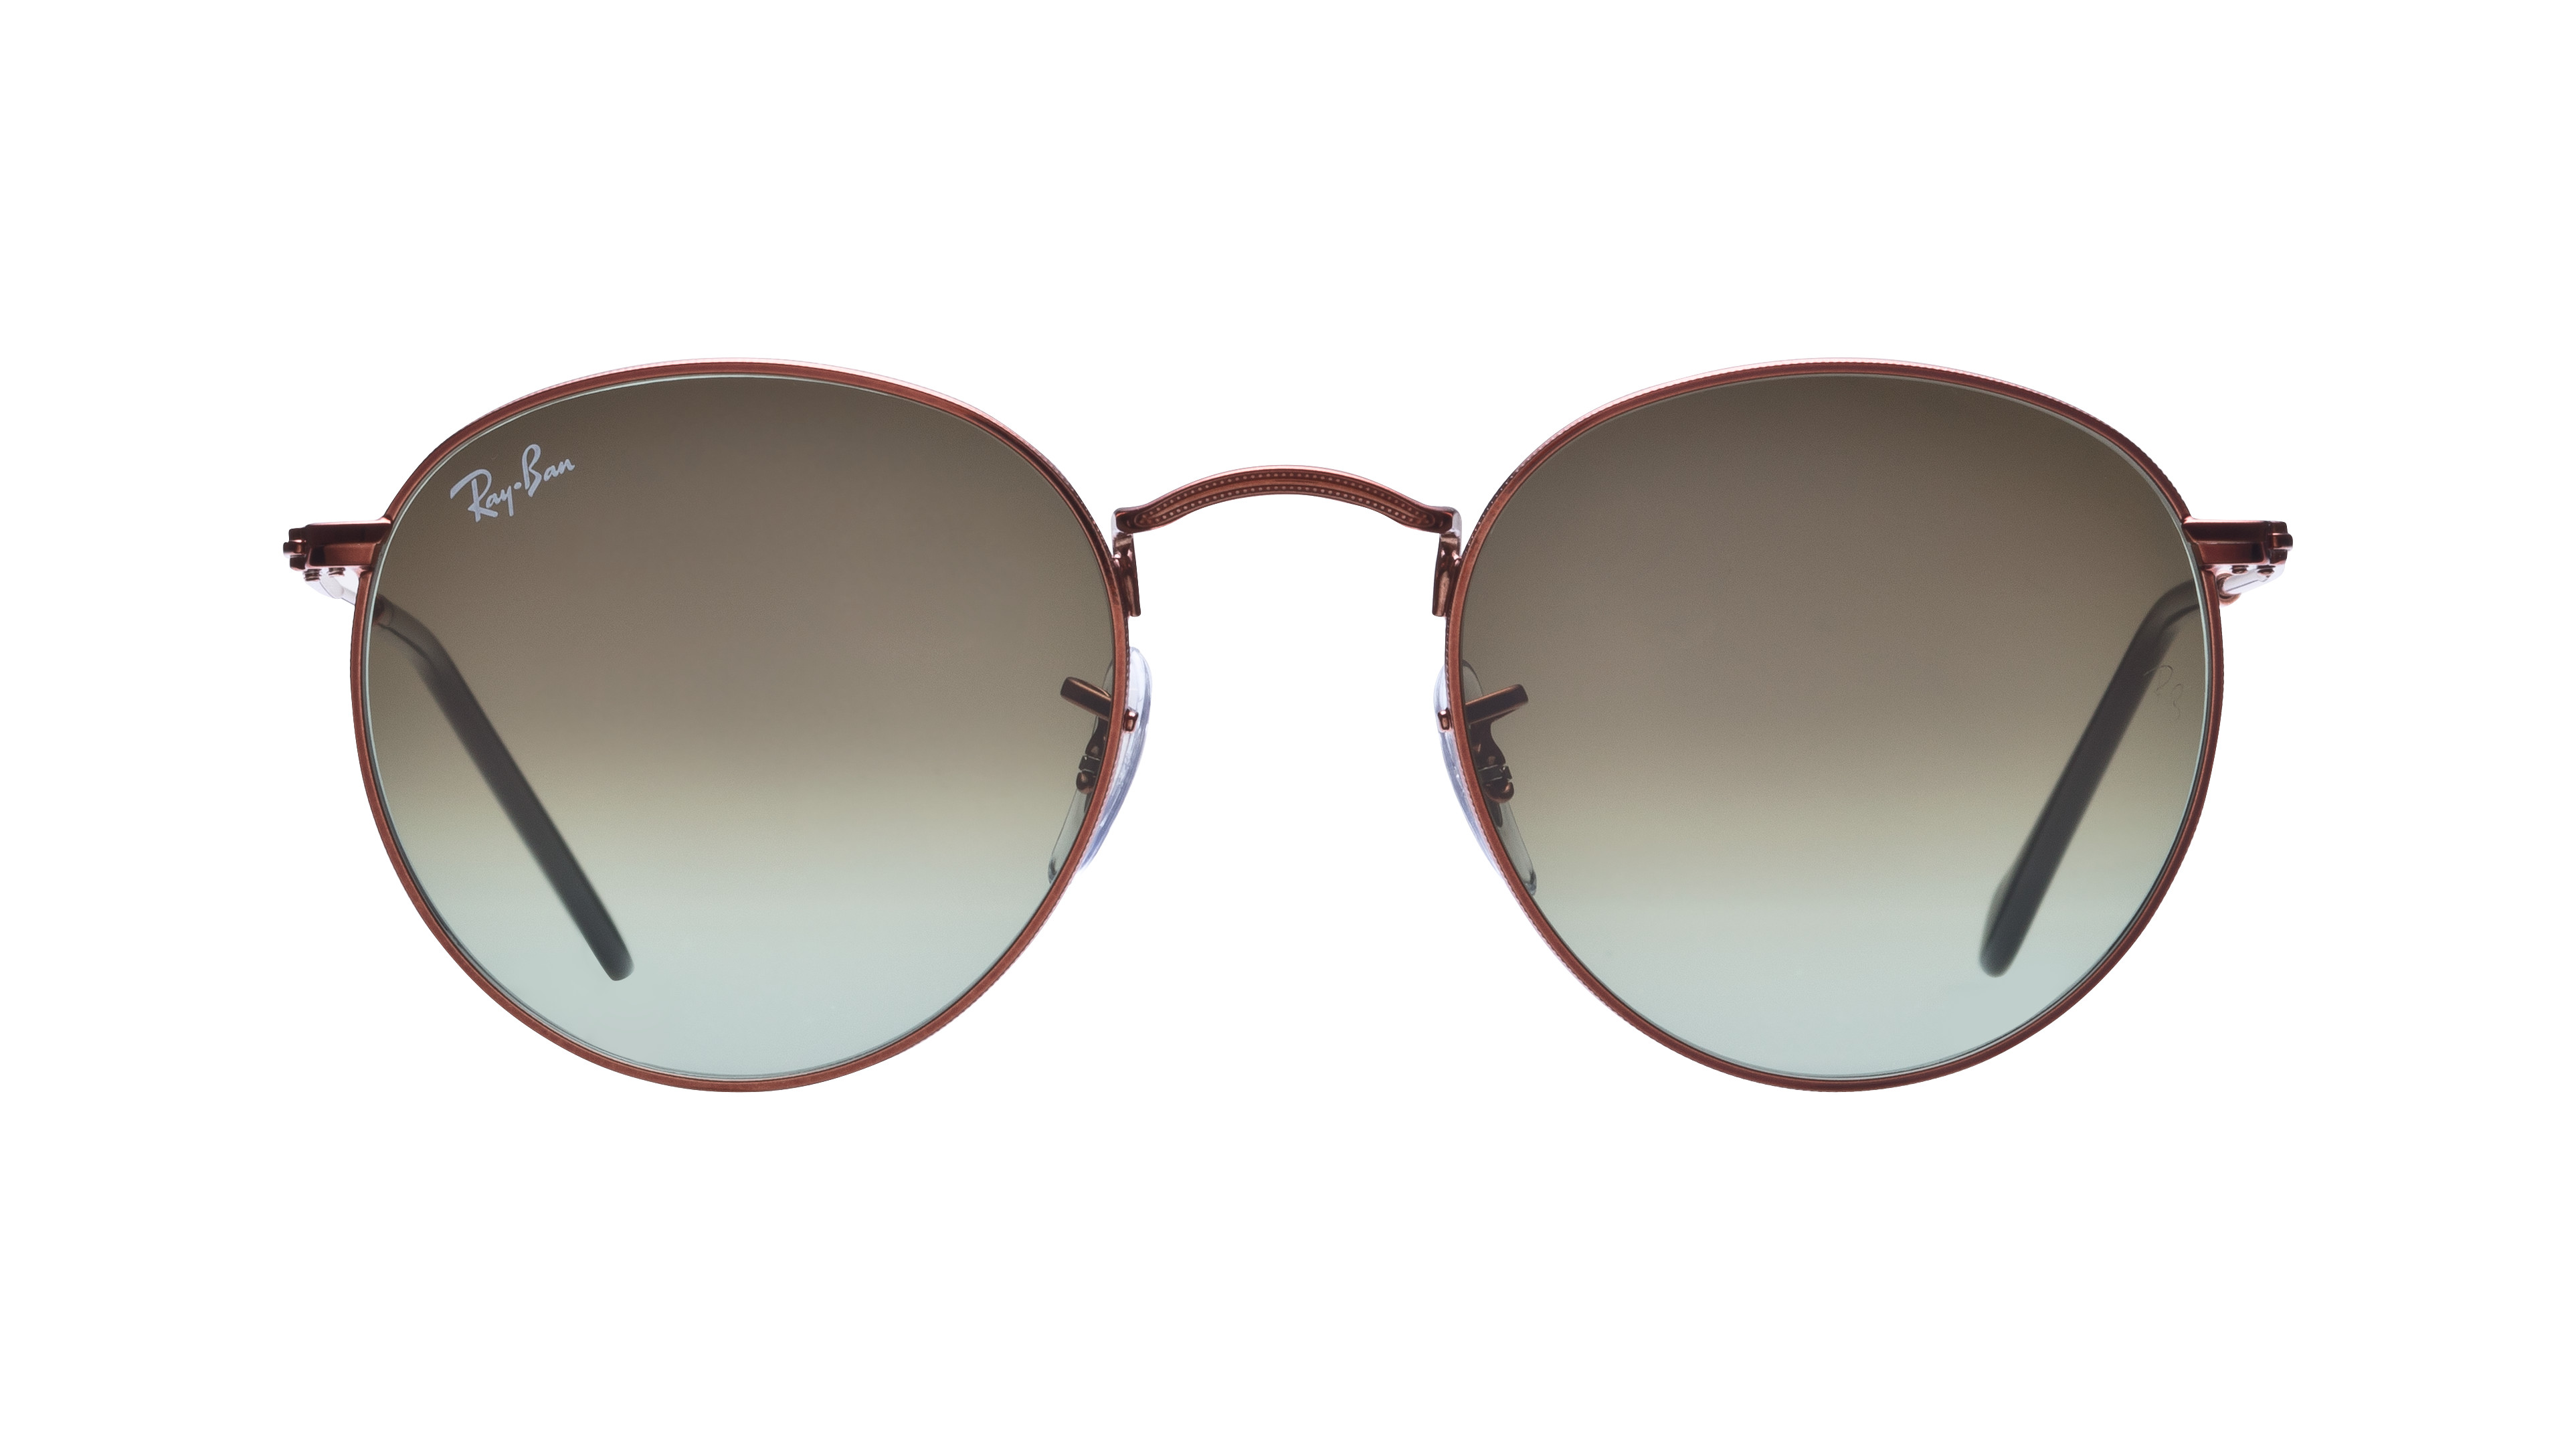 [products.image.front] Ray-Ban ROUND METAL 0RB3447 9002A6 Sonnenbrille